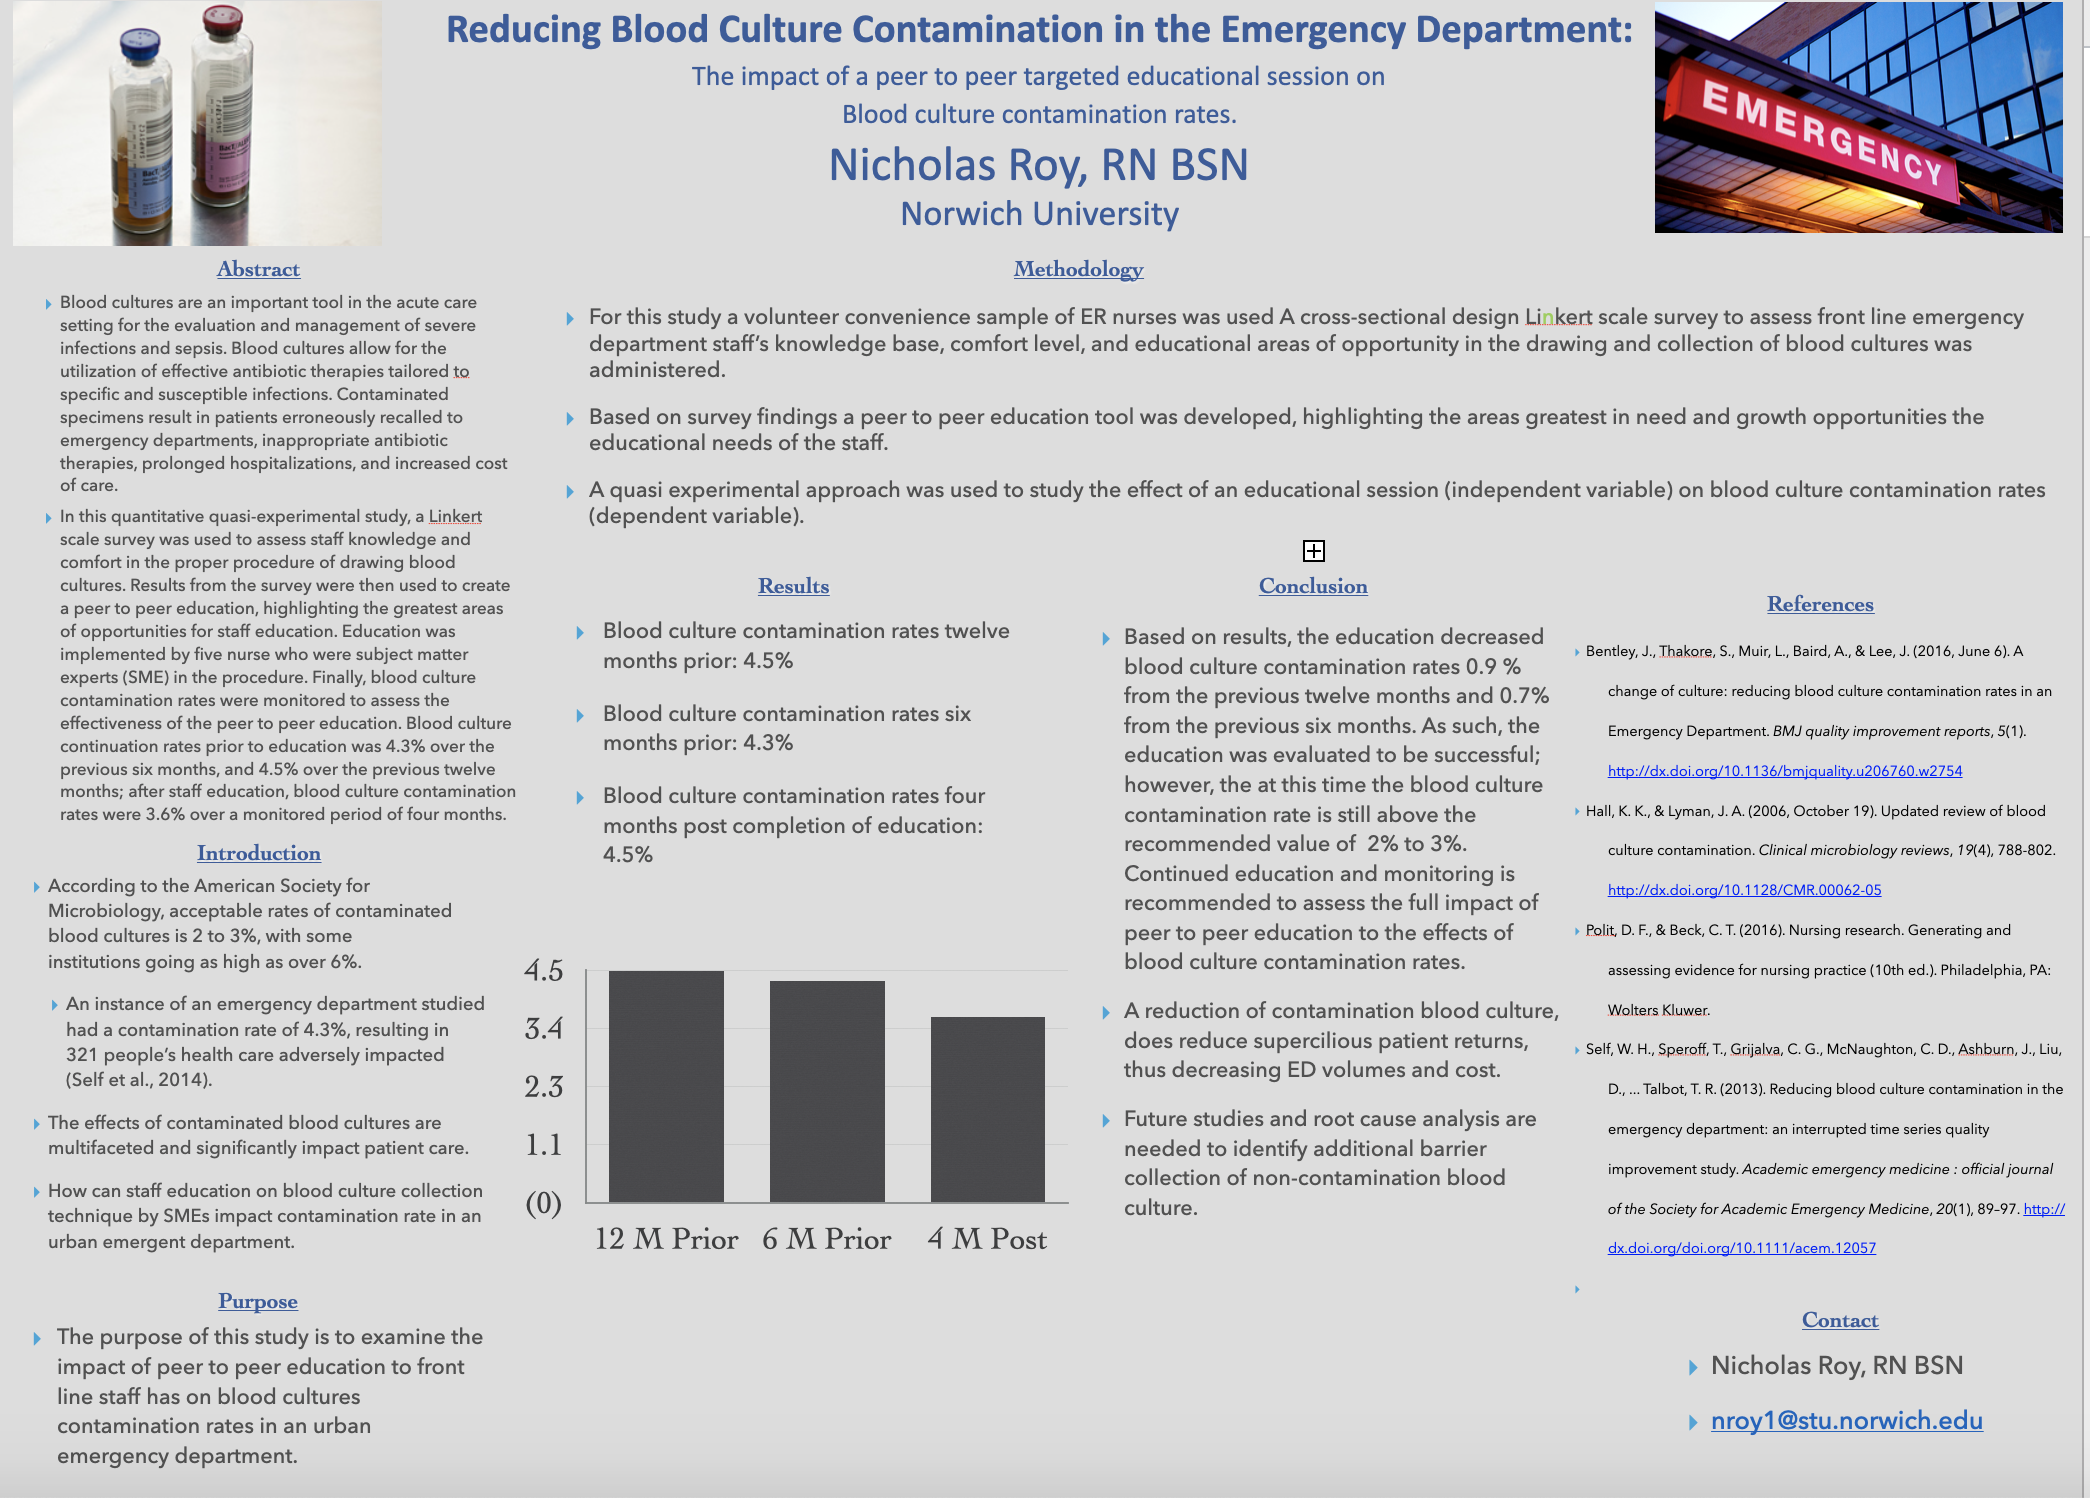 Showcase Image for Reducing Blood Culture Contamination in the Emergency Department:  The impact of a peer to peer targeted educational session on blood culture contamination rates. 